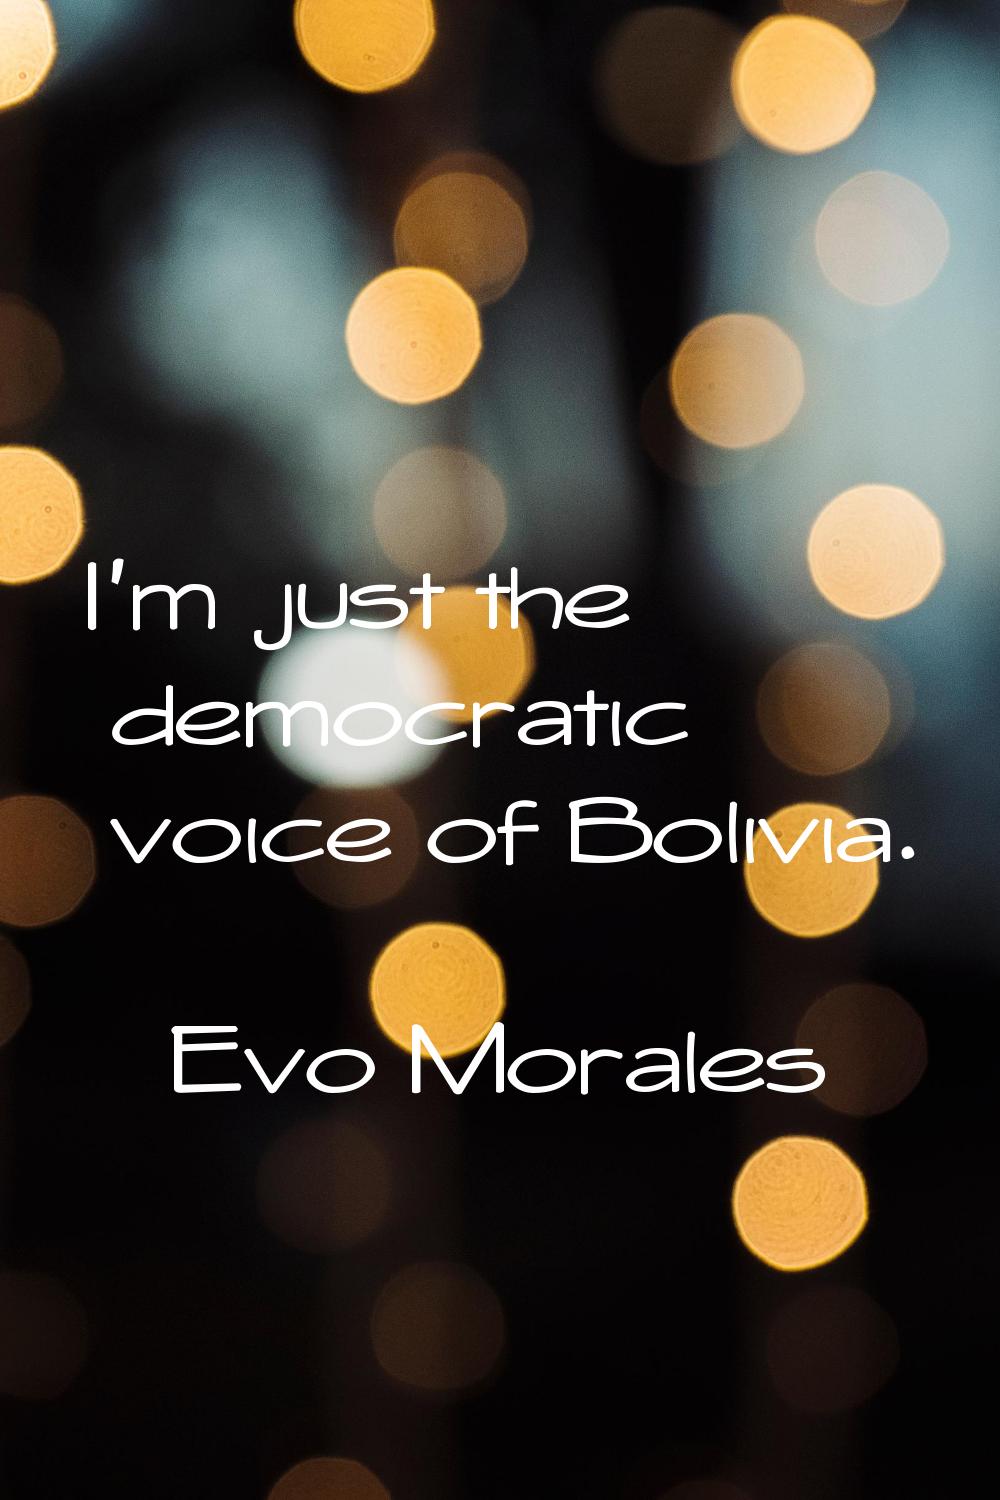 I'm just the democratic voice of Bolivia.